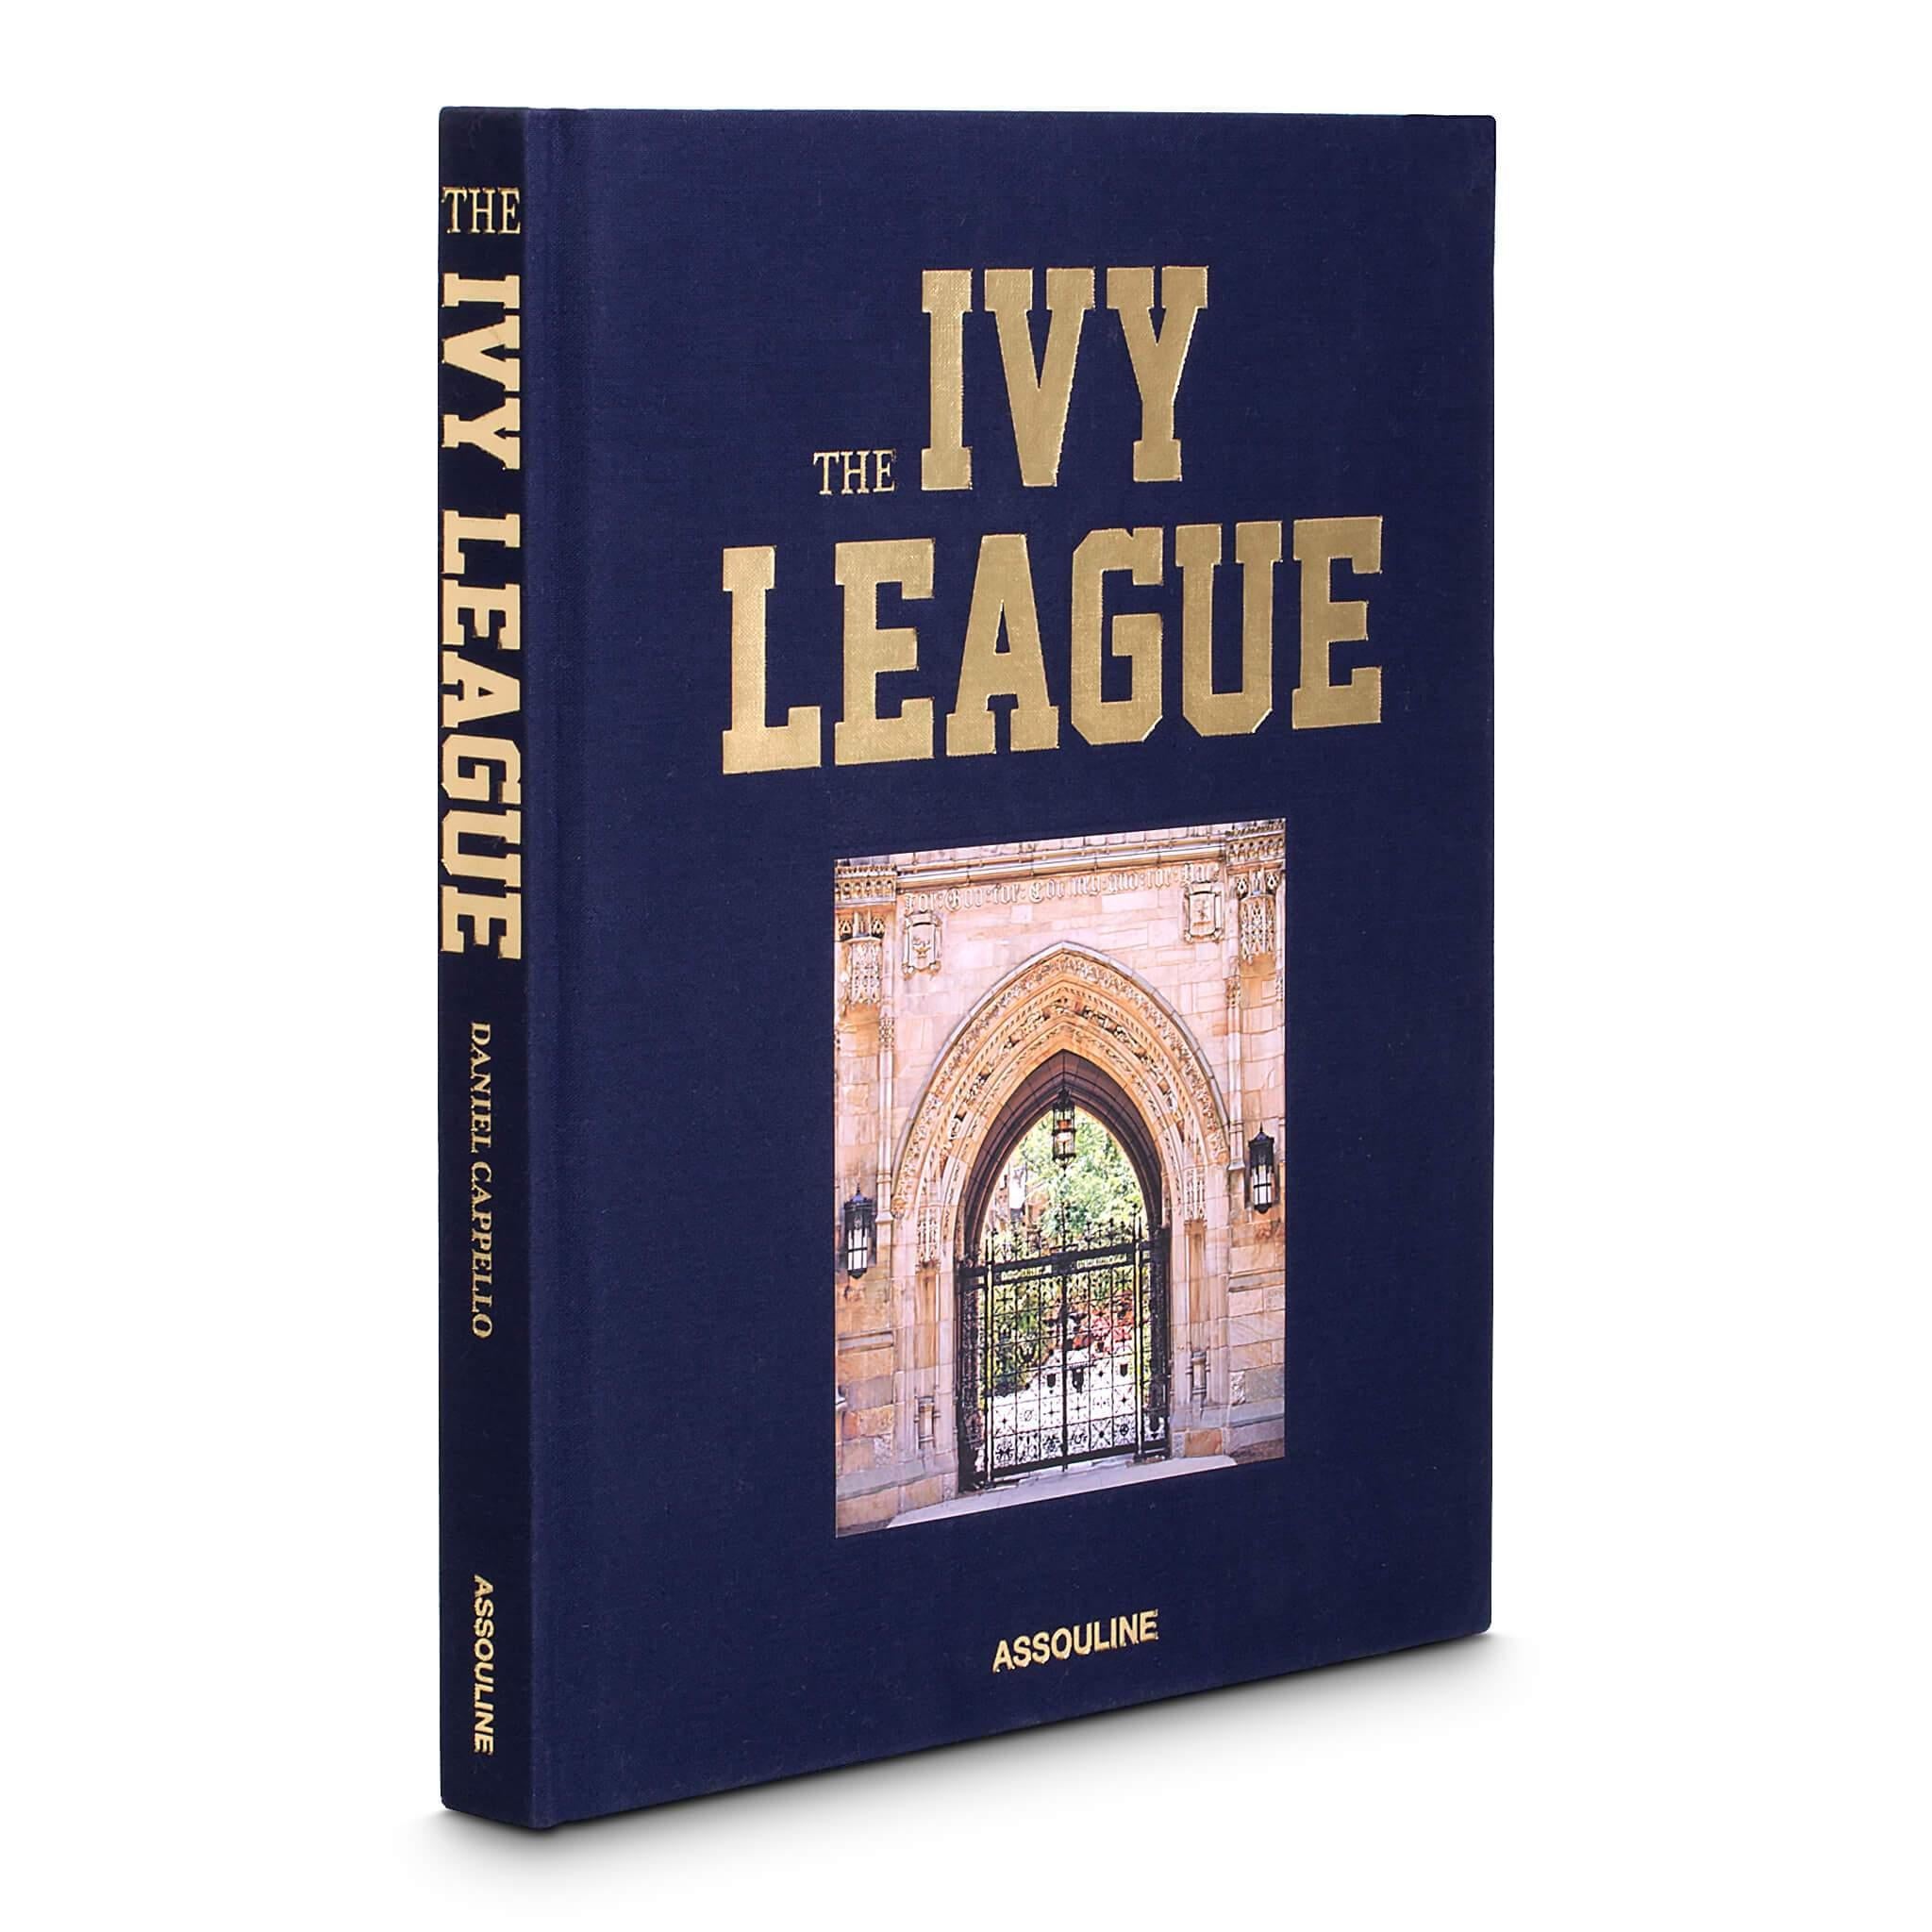 The Ivy League by Daniel Cappello
In stock in Los Angeles

Much more than a grouping of eight colleges and universities, the Ivy League—with its hallowed halls, private clubs, and grassy quadrangles—is the consummate reward of the American Dream.